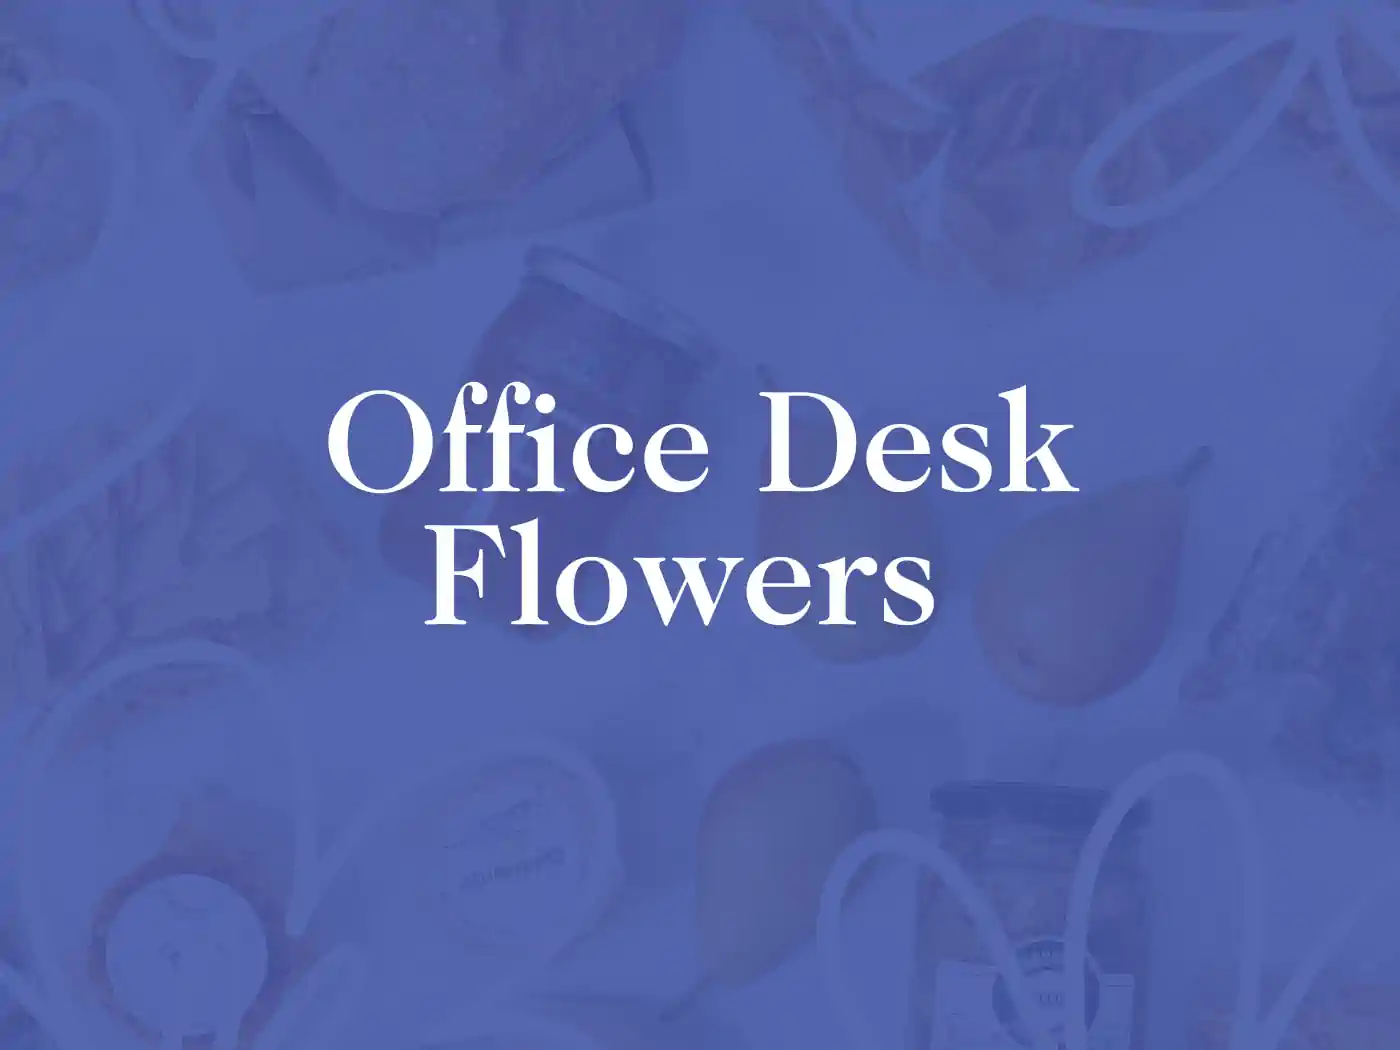  Title image featuring the text "Office Desk Flowers" with a background of various flowers and fruits. Fabulous Flowers and Gifts. Office Desk Flowers Collection.